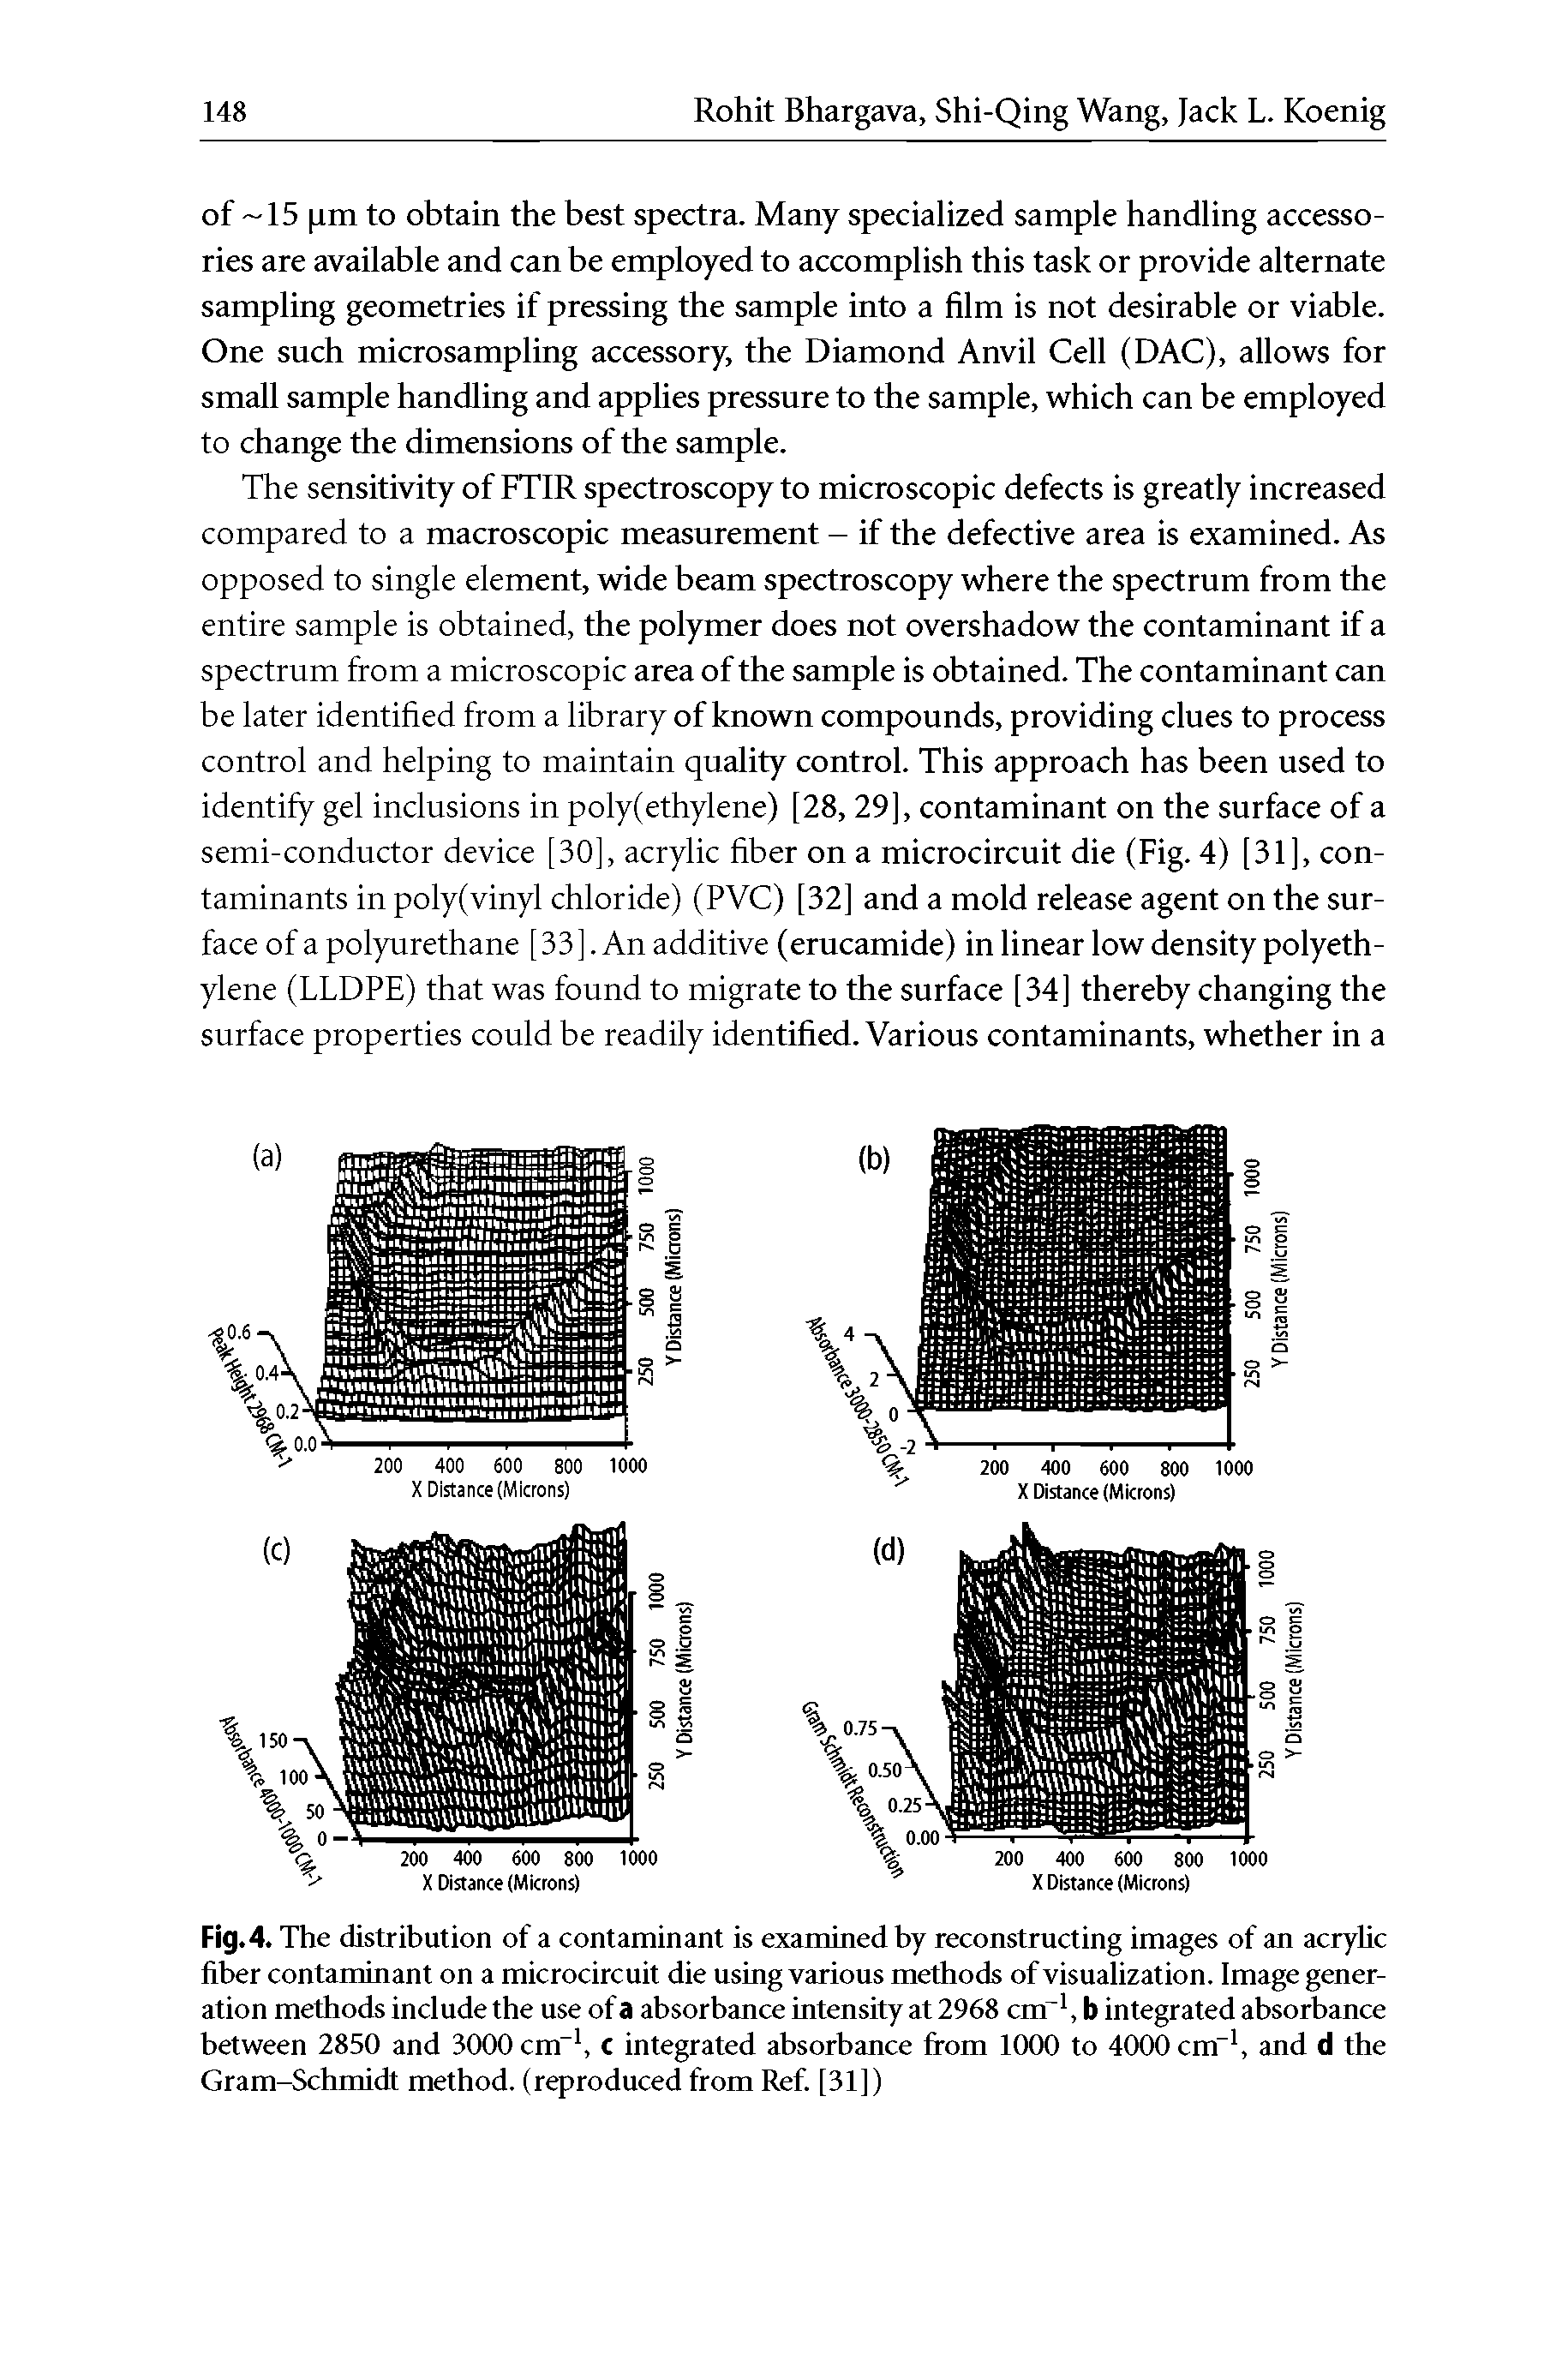 Fig.4. The distribution of a contaminant is examined by reconstructing images of an acrylic fiber contaminant on a microcircuit die using various methods of visualization. Image generation methods include the use of a absorbance intensity at 2968 cm, b integrated absorbance between 2850 and 3000 cm"b C integrated absorbance from 1000 to 4000 cm , and d the Gram-Schmidt method, (reproduced from Ref. [31])...